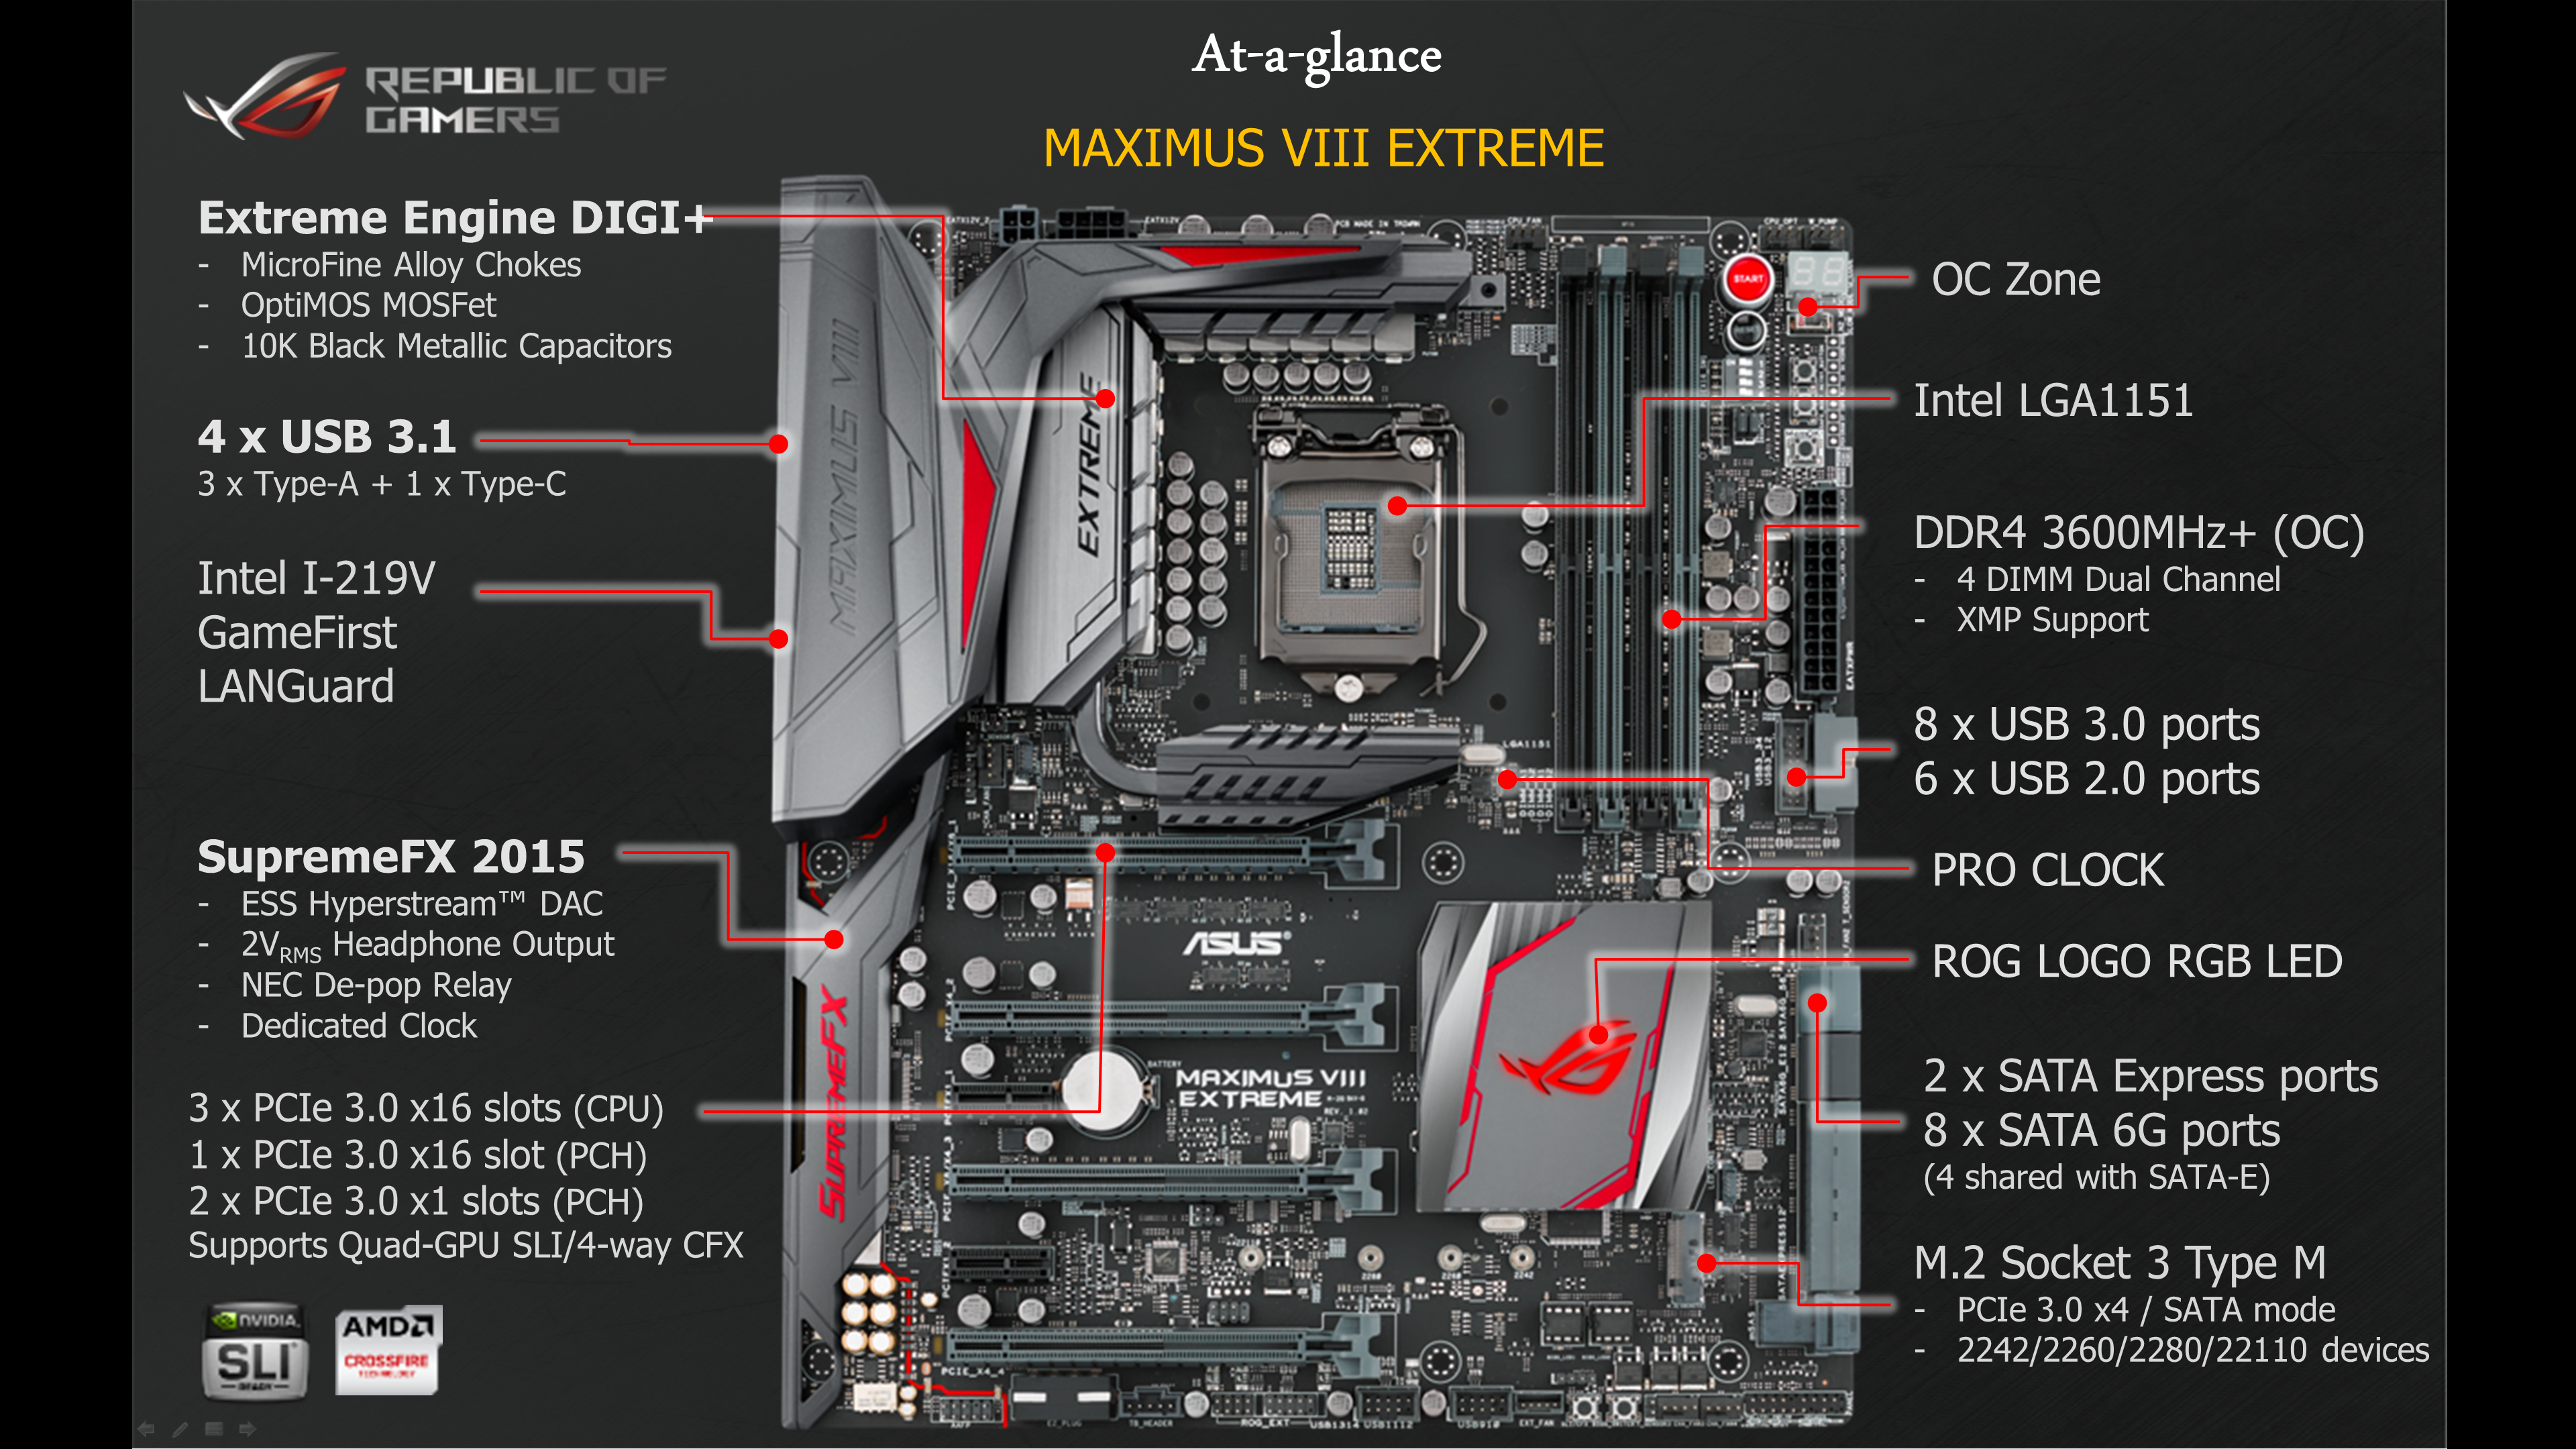 ASUS Z170: of Gamers - Intel Skylake Z170 Motherboards: Quick Look at New